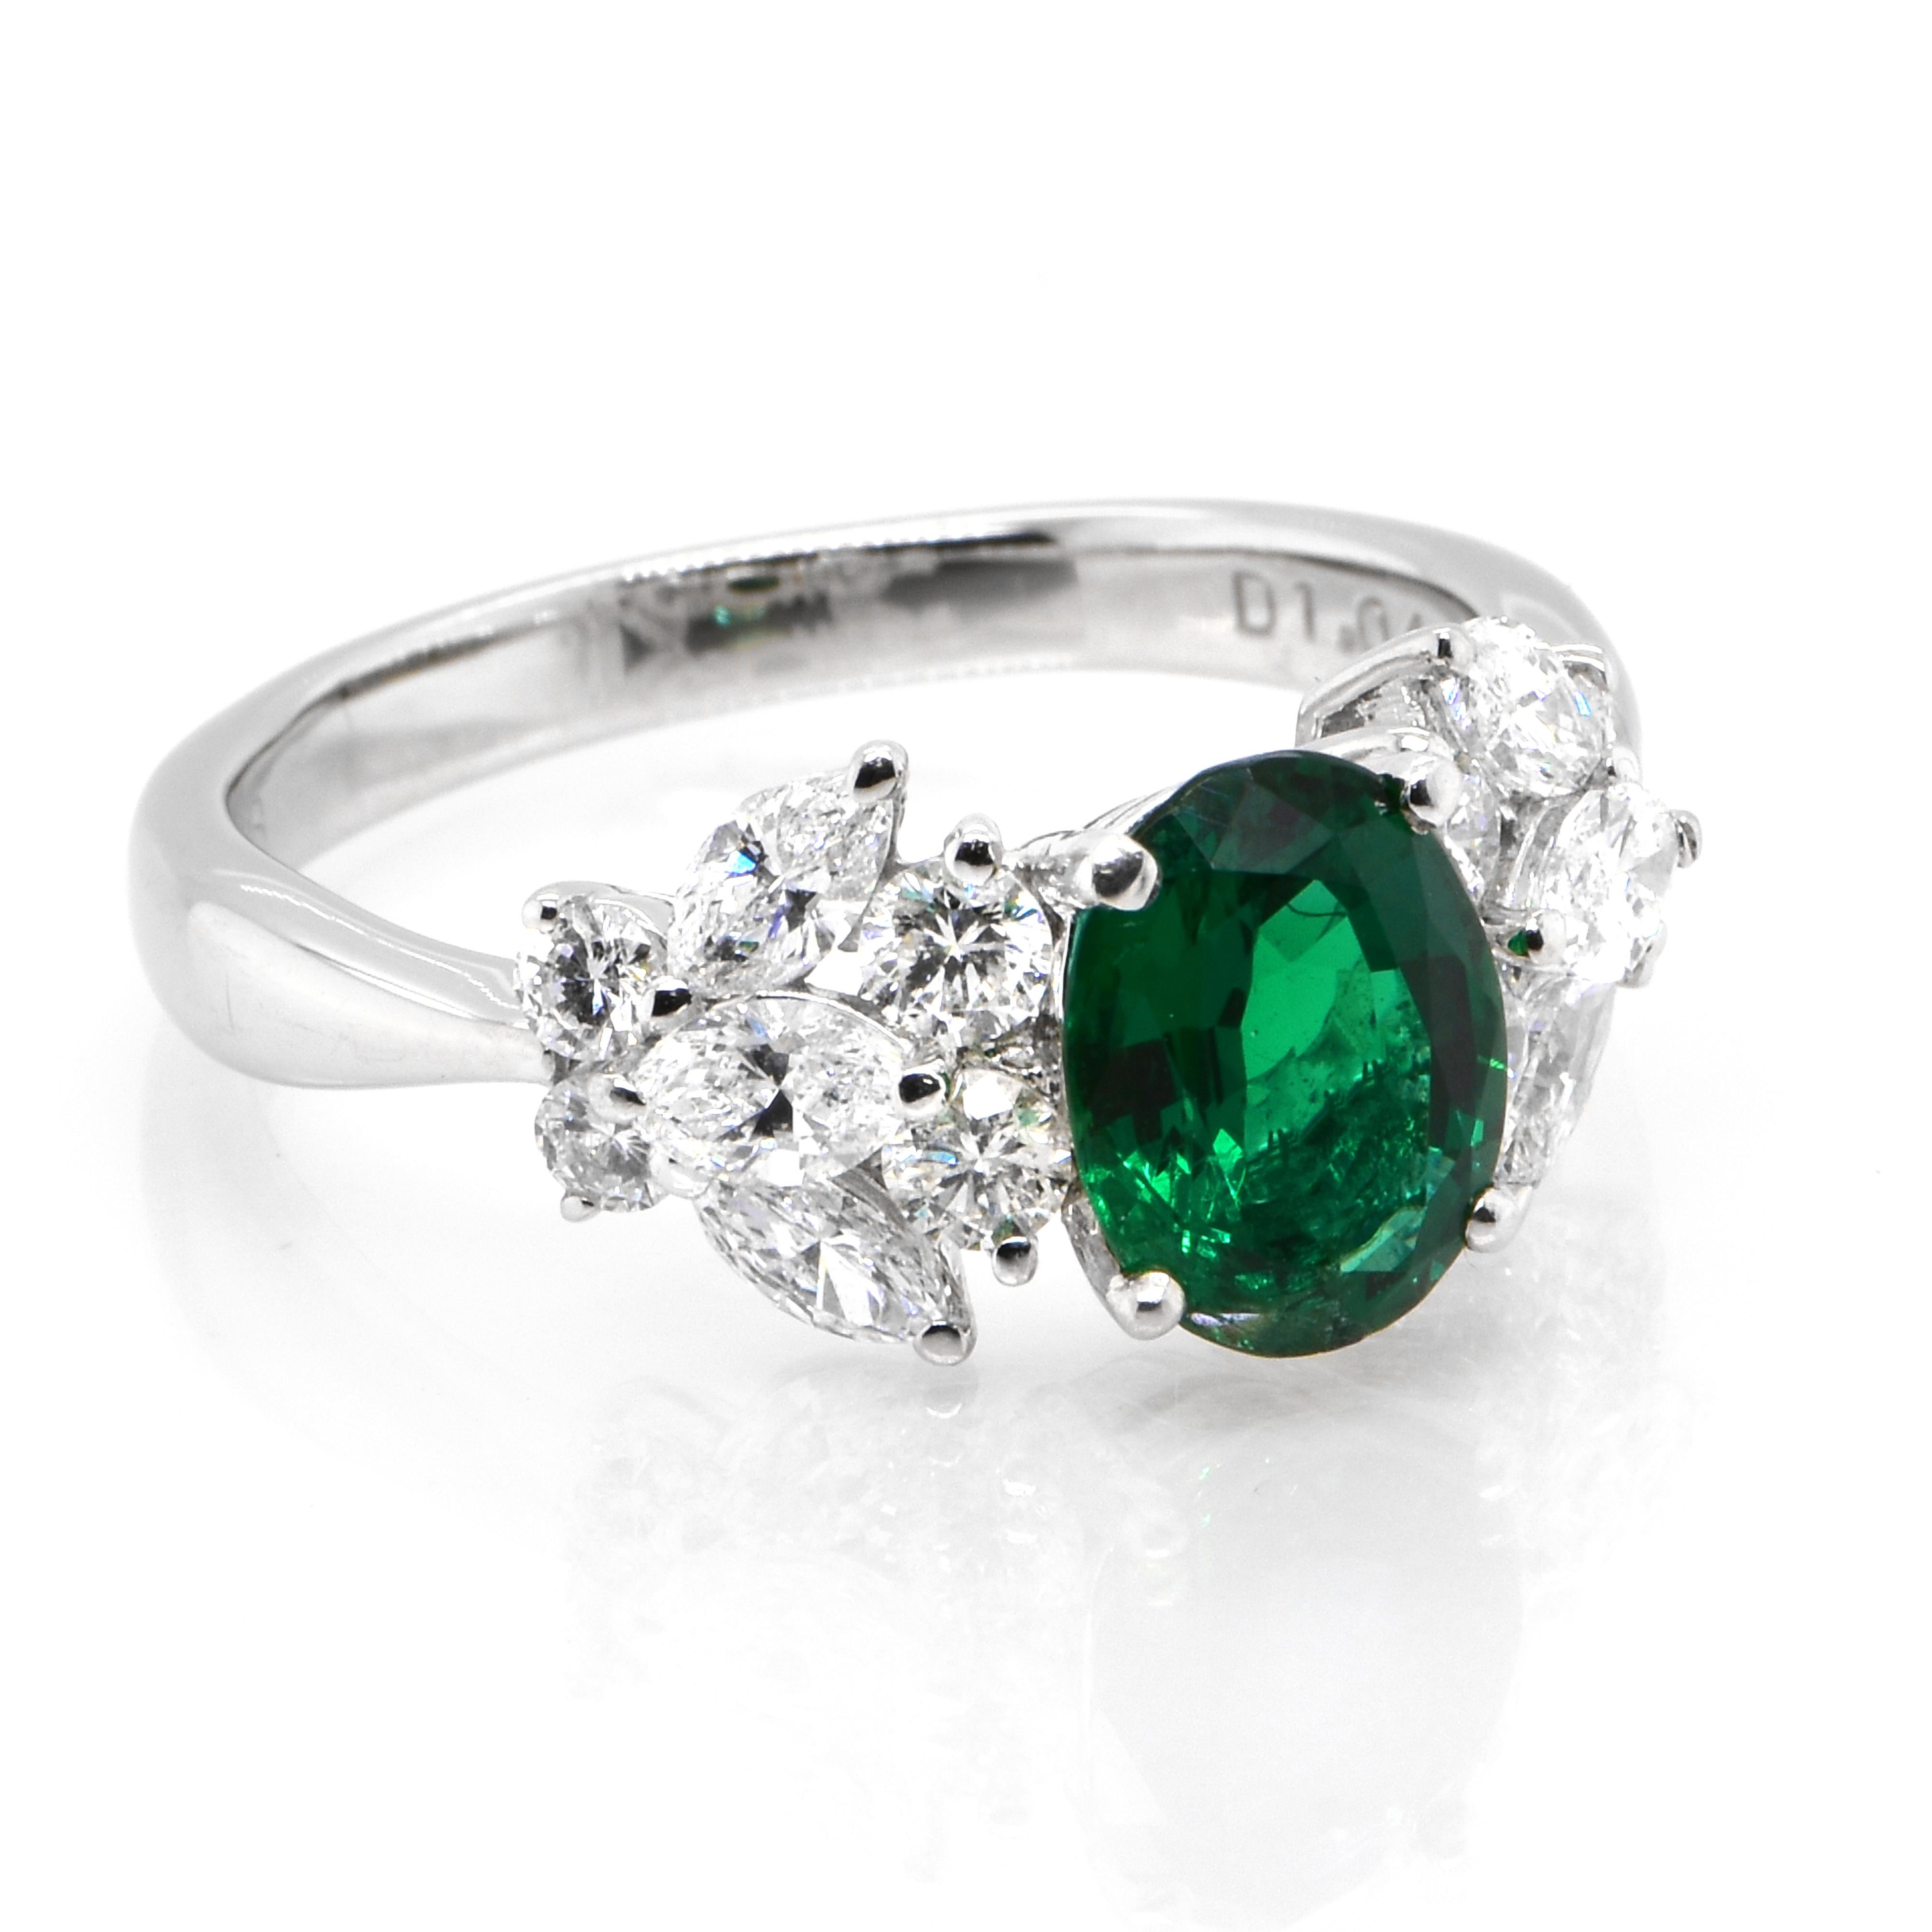 Modern 1.28 Carat Natural Vivid Green Emerald and Diamond Ring Made in Platinum For Sale